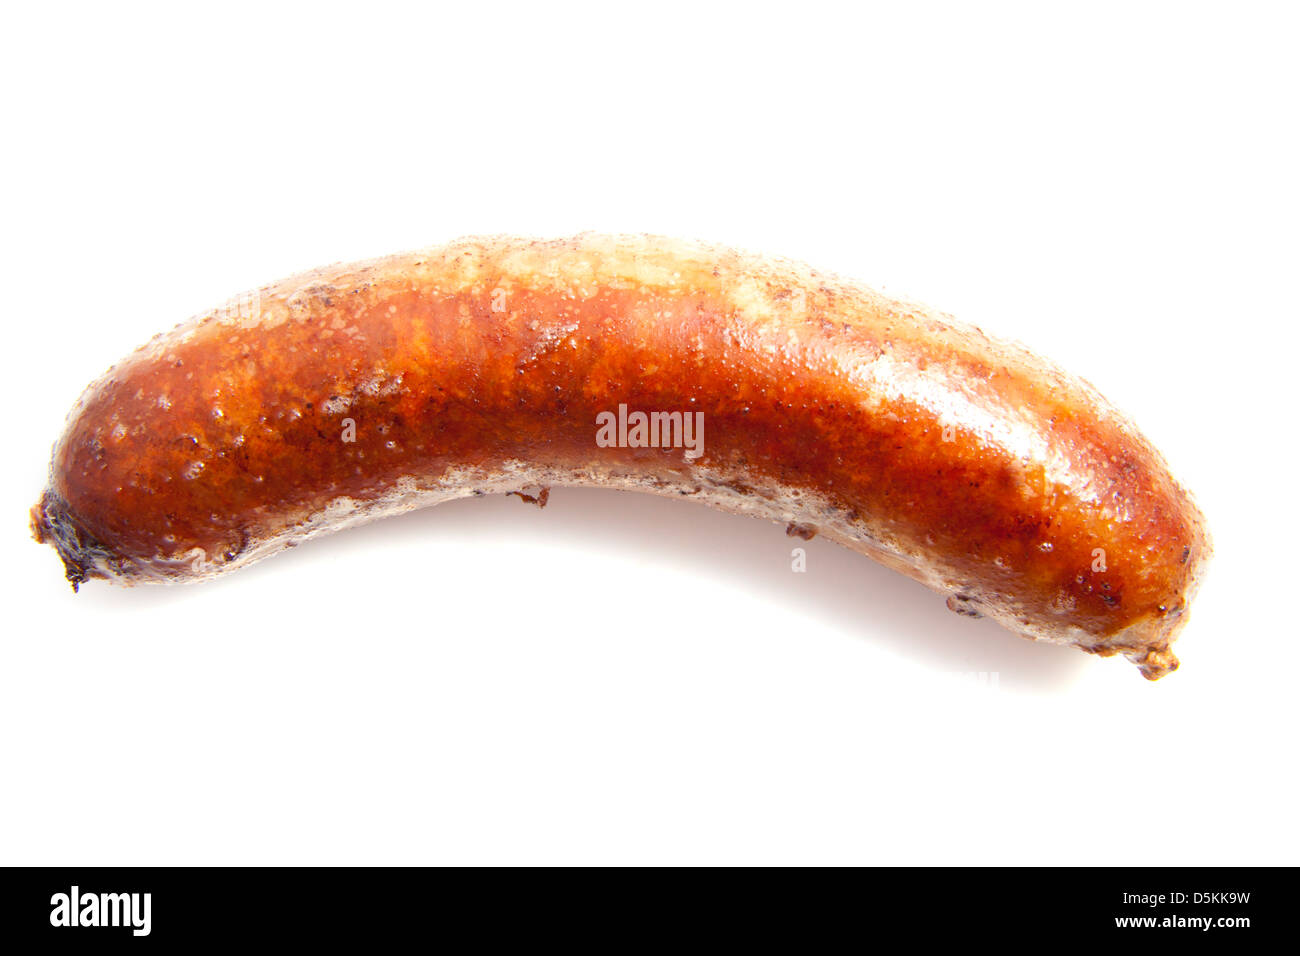 German sausage isolated on a white background Stock Photo